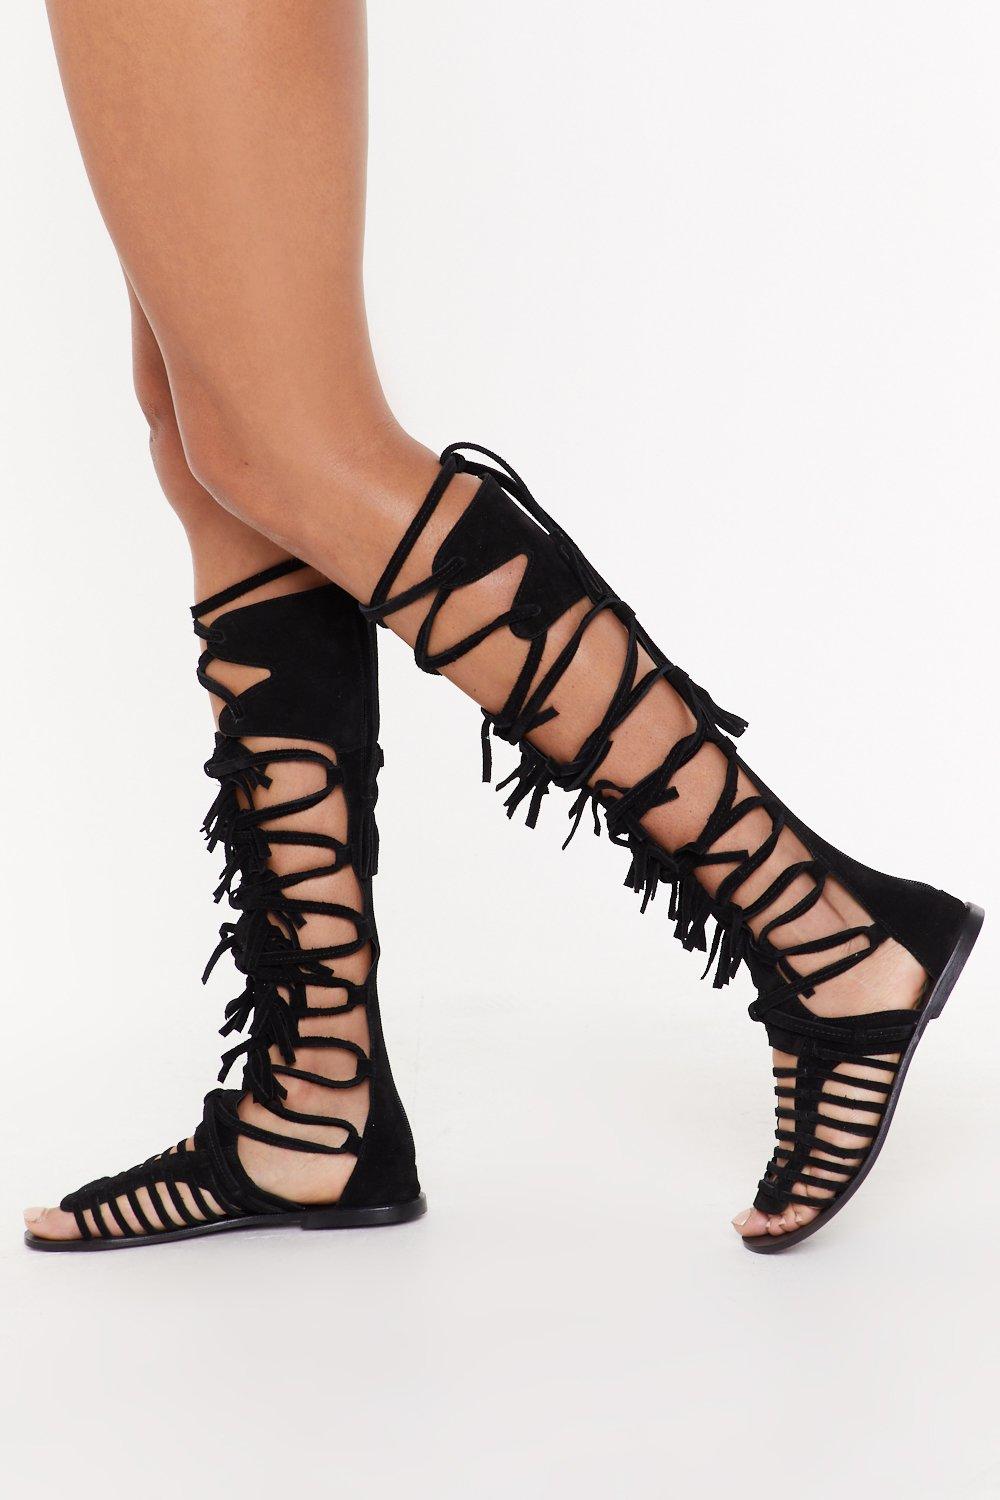 looking for gladiator sandals